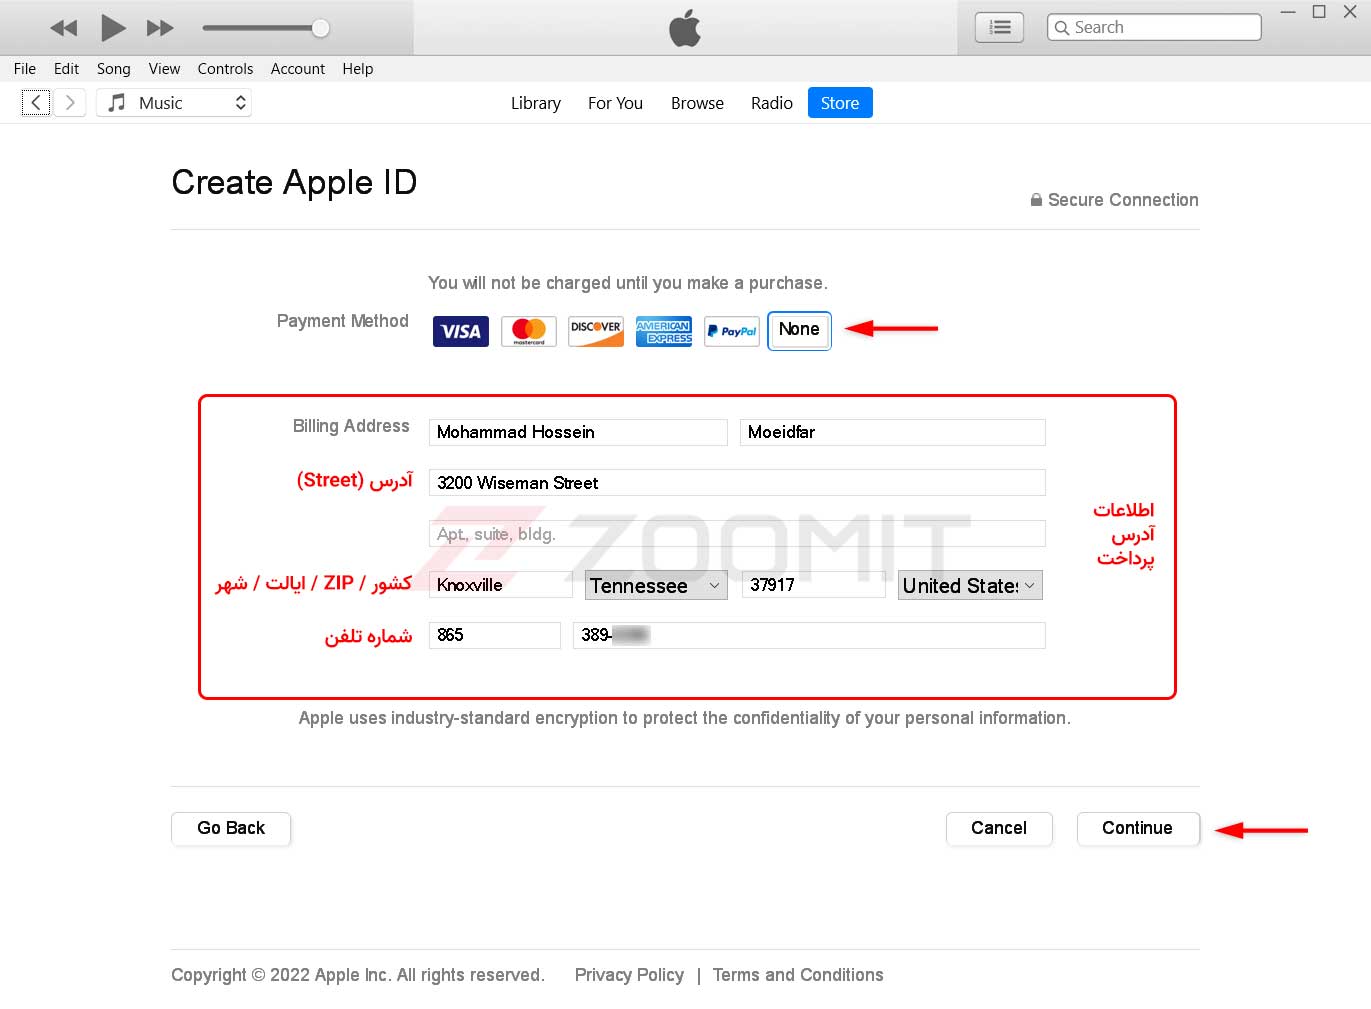 Steps to create an Apple ID using iTunes 7